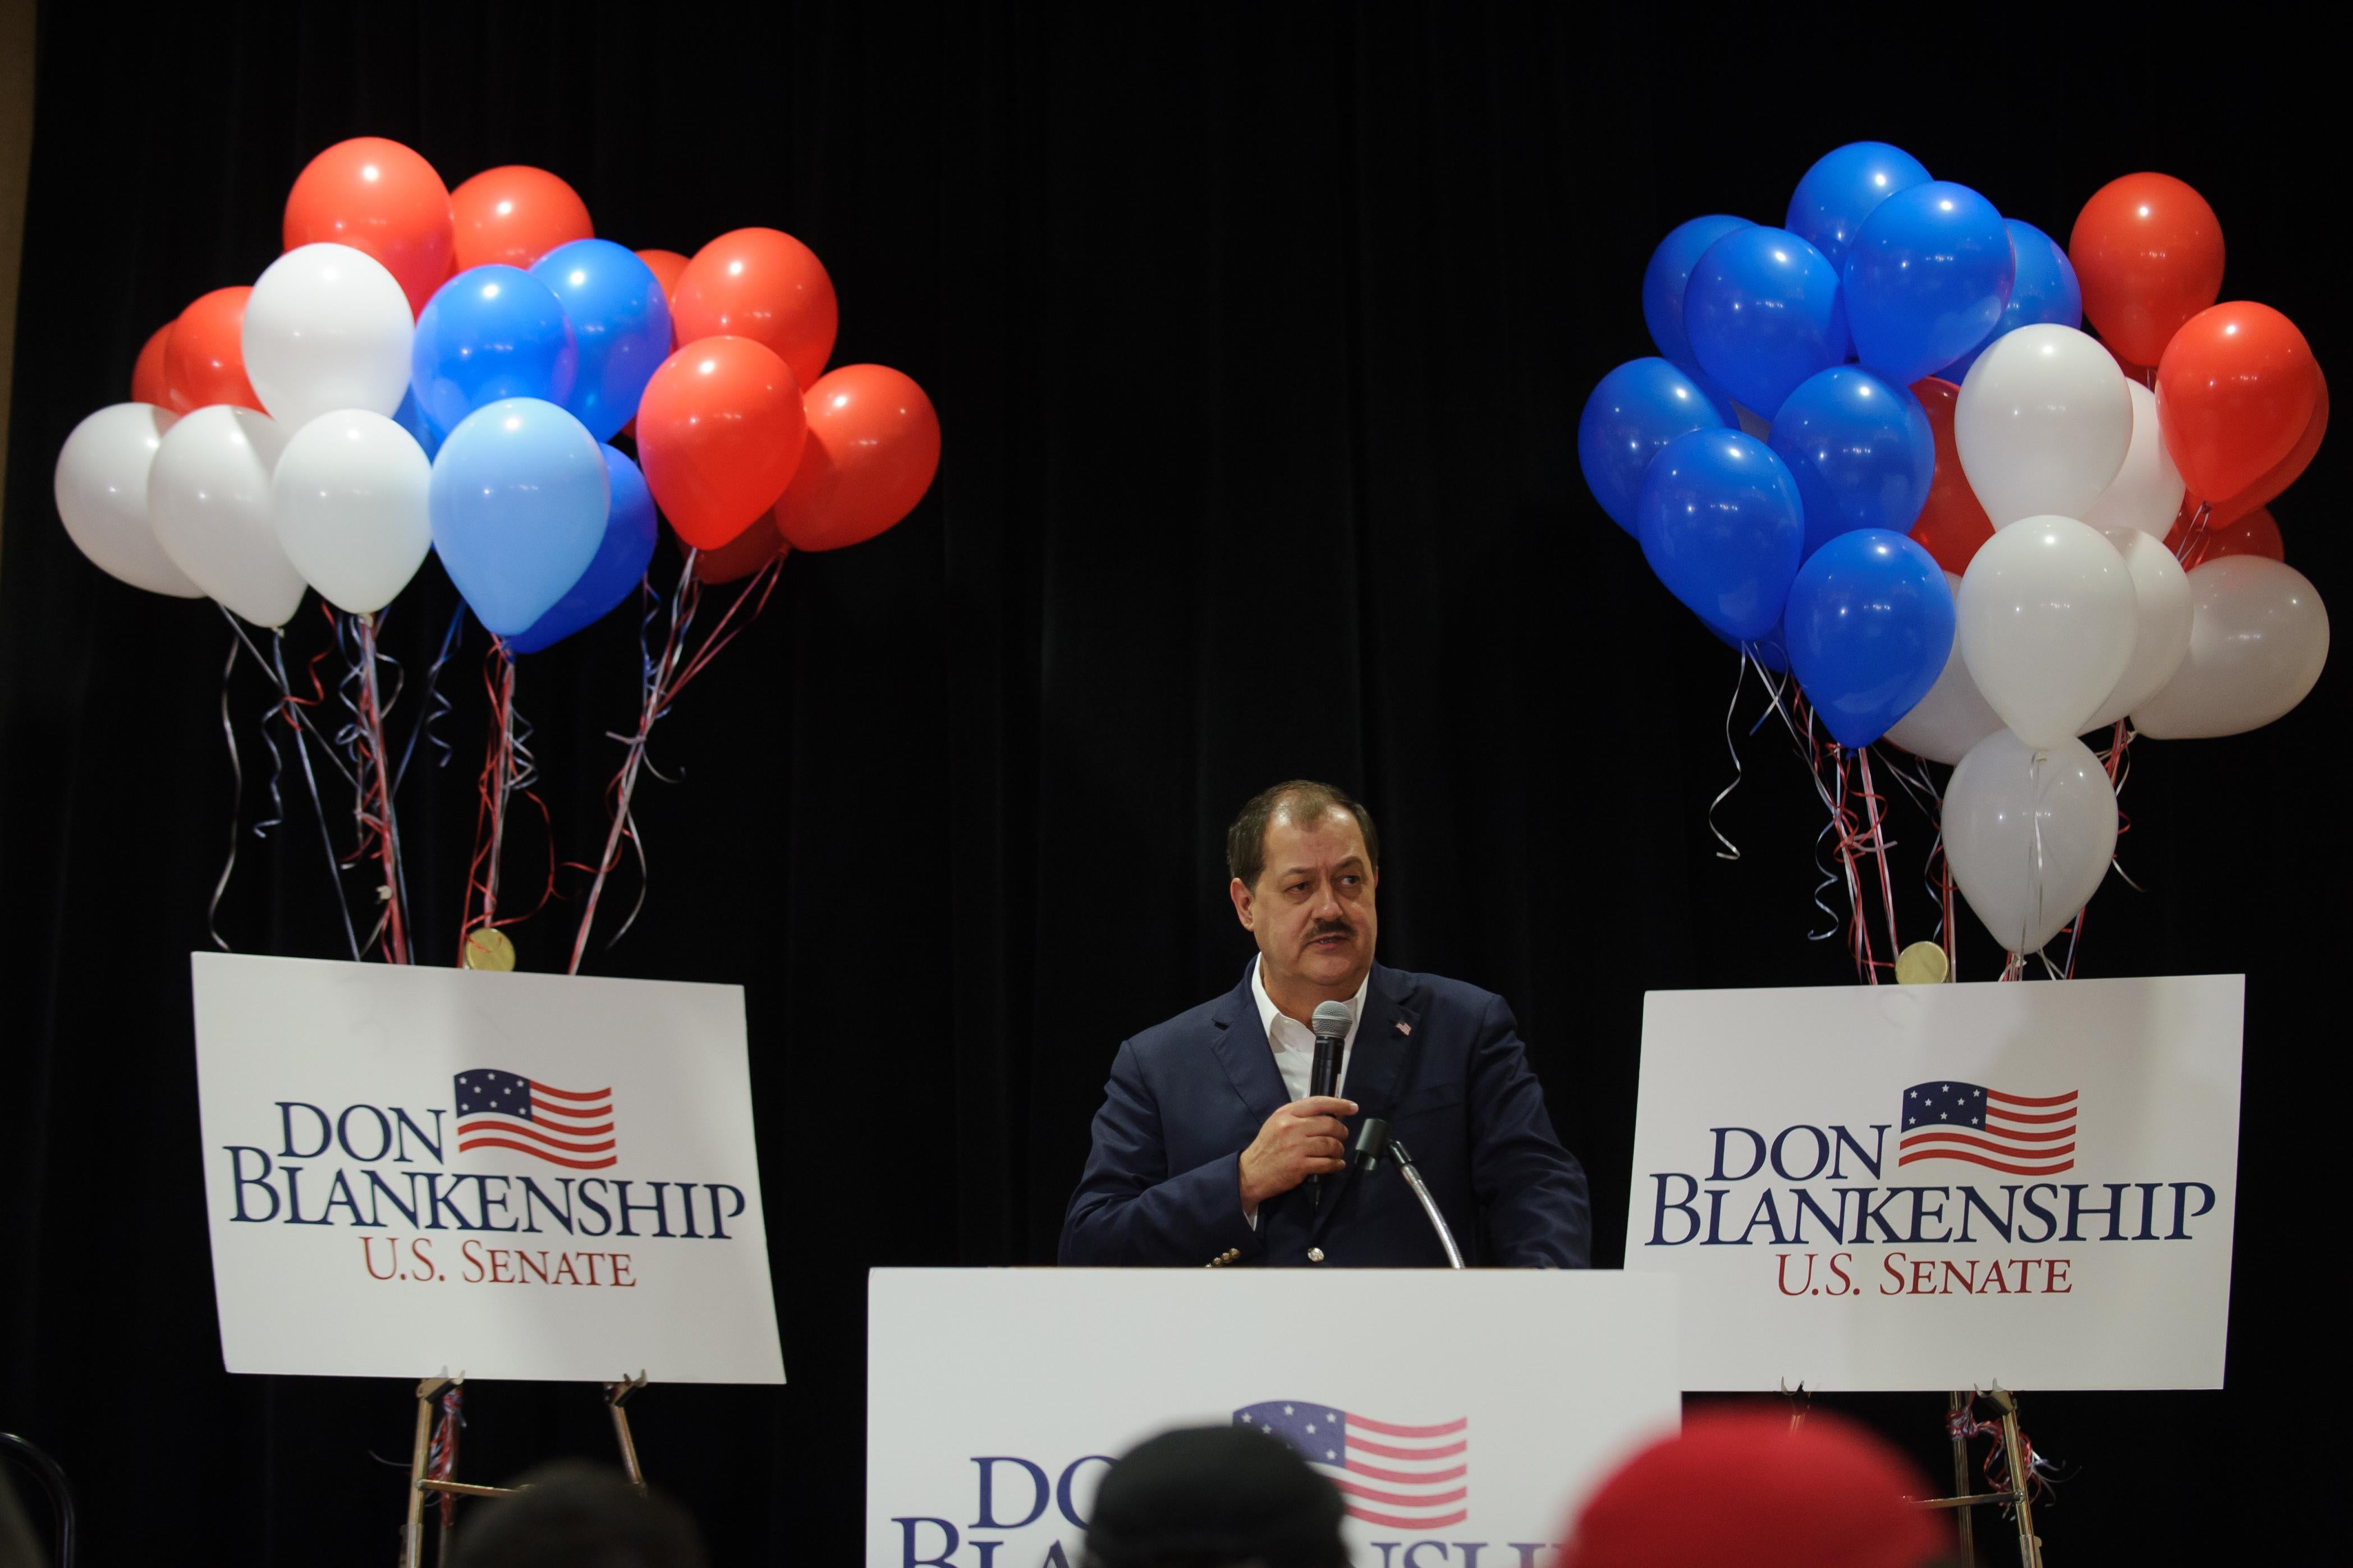 U.S. Senate Republican primary candidate Don Blankenship addresses supporters following a poor showing in the polls May 8, 2018 in Charleston, West Virginia. 